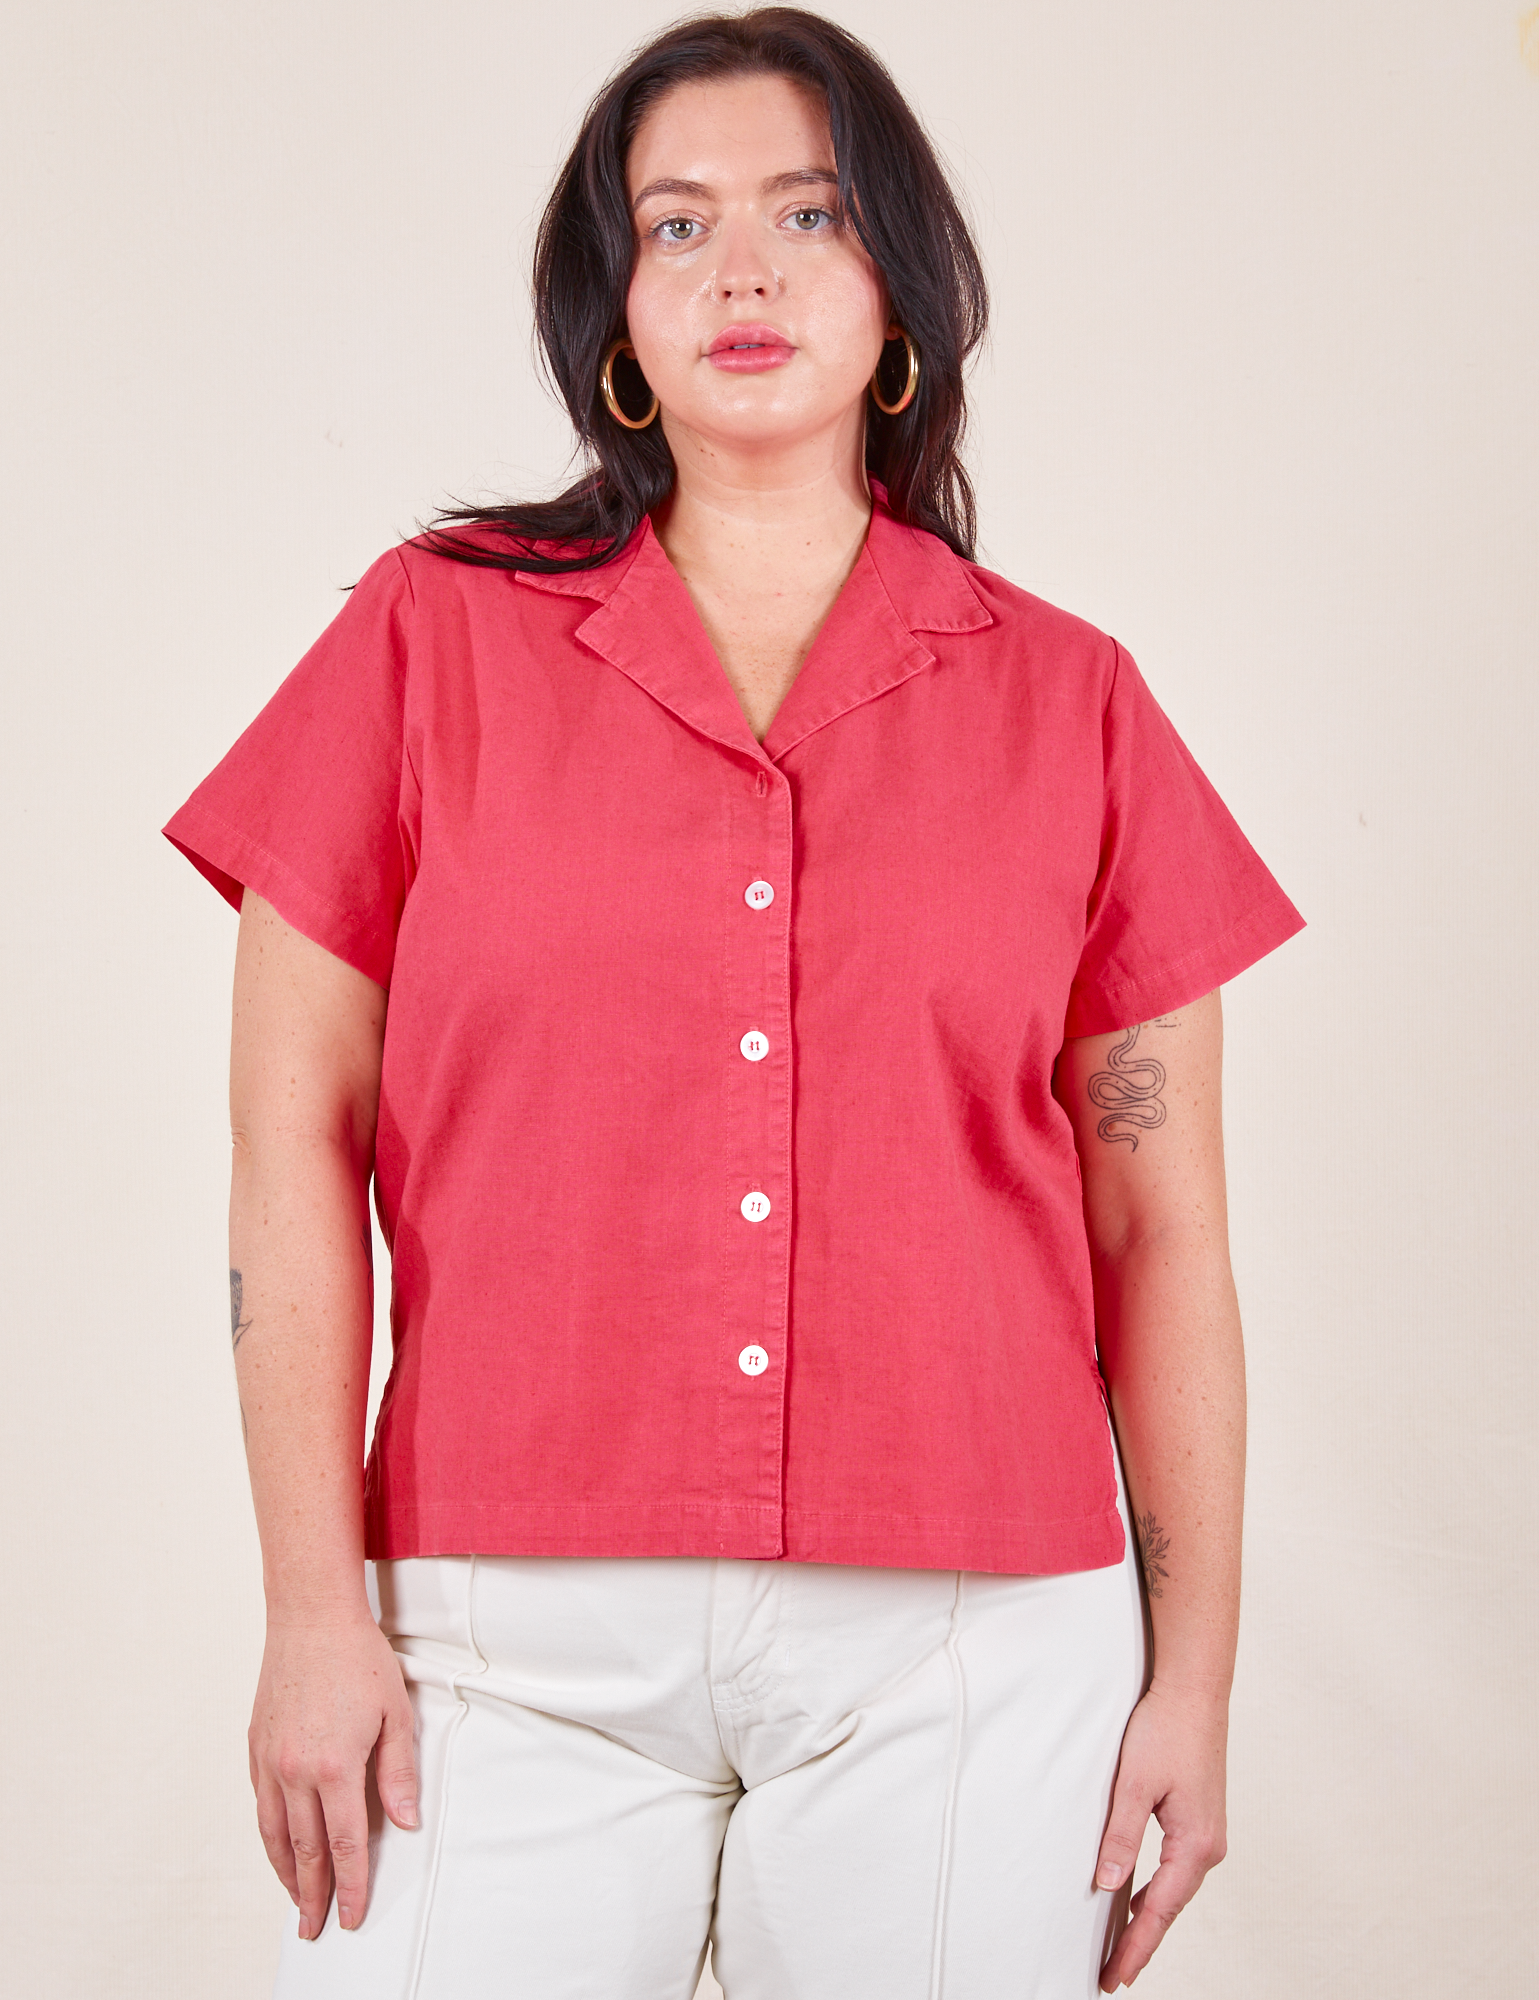 Faye is wearing Pantry Button-Up in Hot Pink